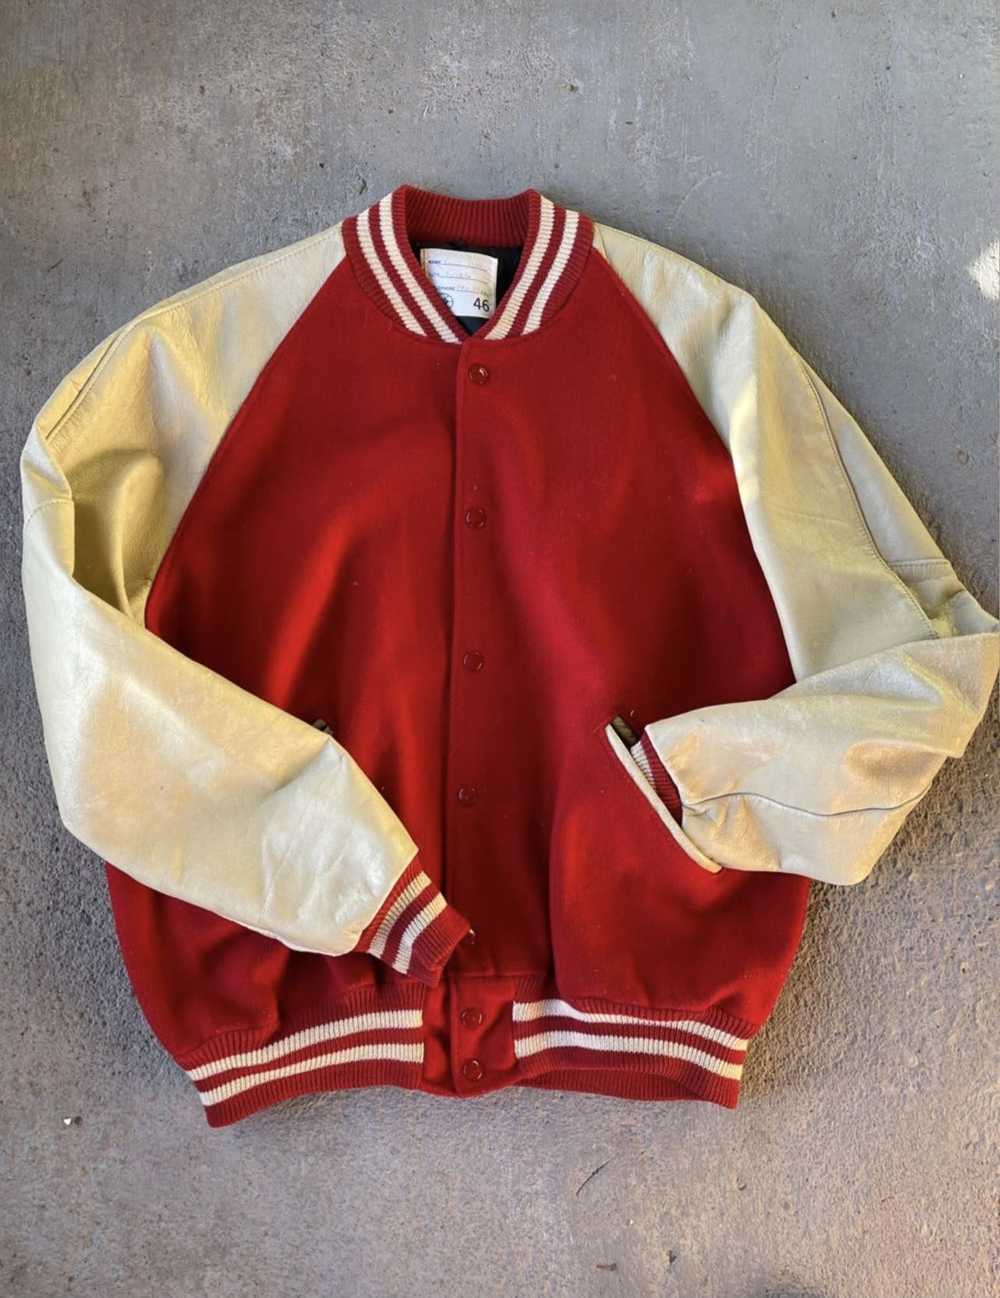 LuckyVintage on X: 60s MARCHING BAND JACKET / 1960s Cropped Red Military  Style Wildcats Jacket xs s by luckyvintageseattle (95.00 USD)   / X